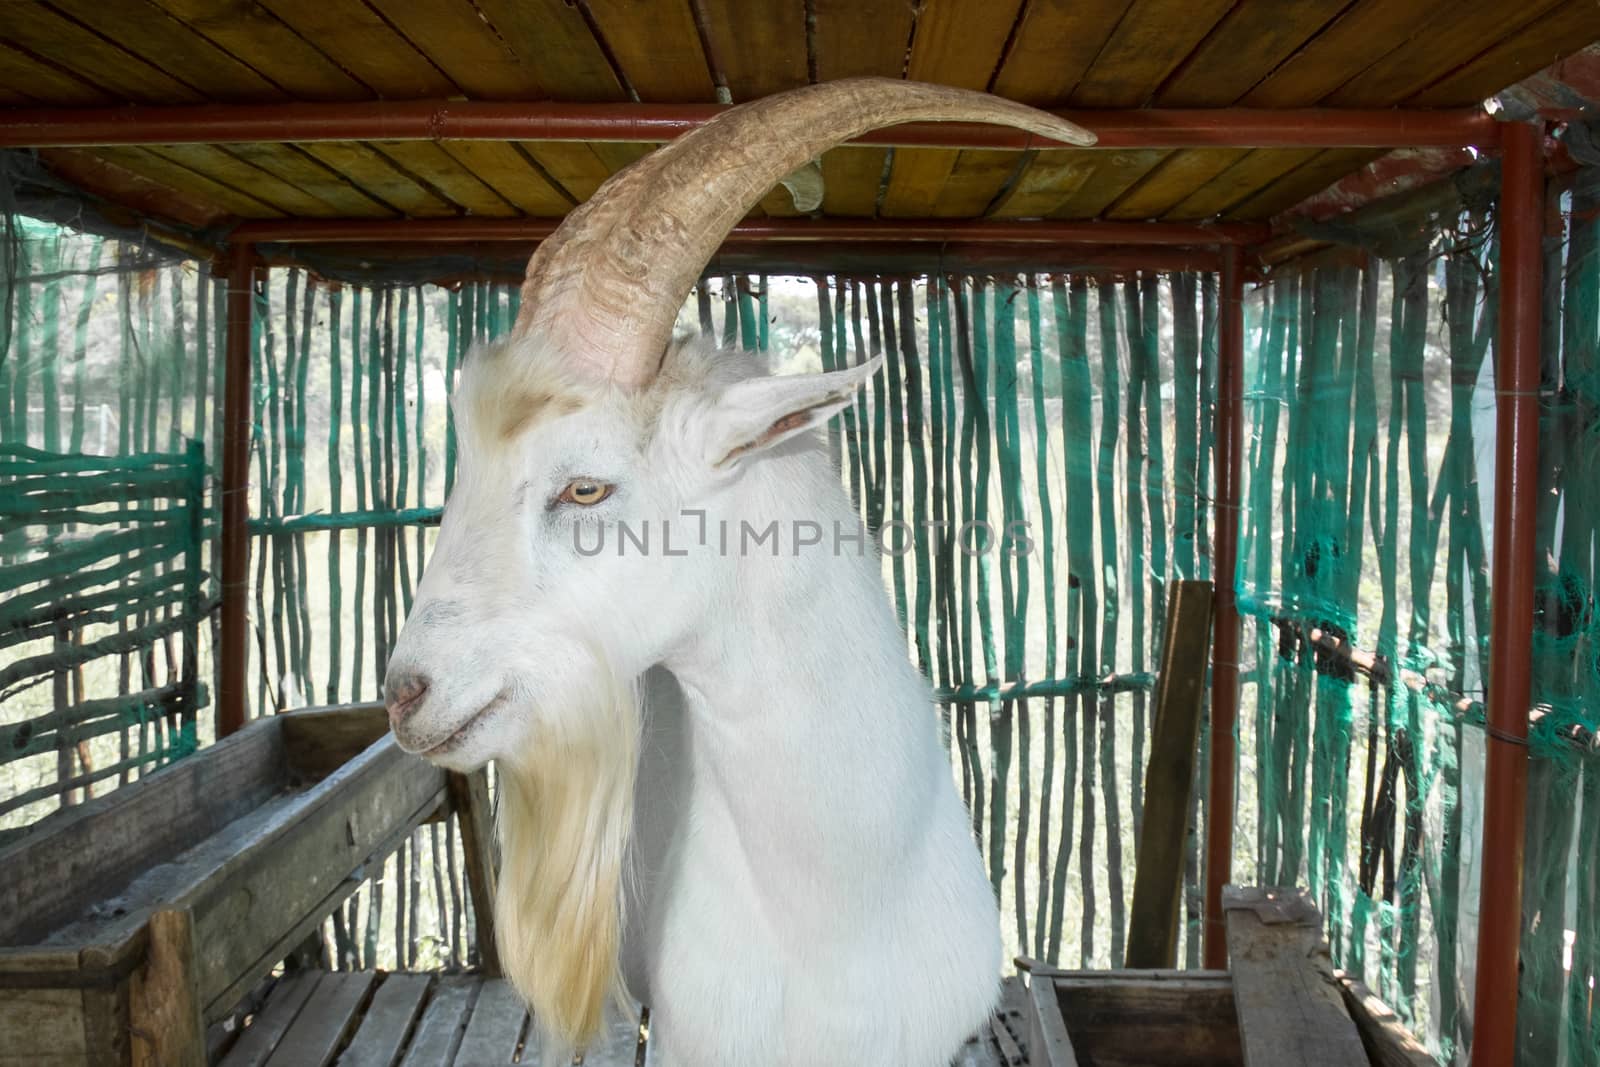 Saanen billygoat standing in his stables, looking towards the viewer while diplaying his big horns and long white beard.